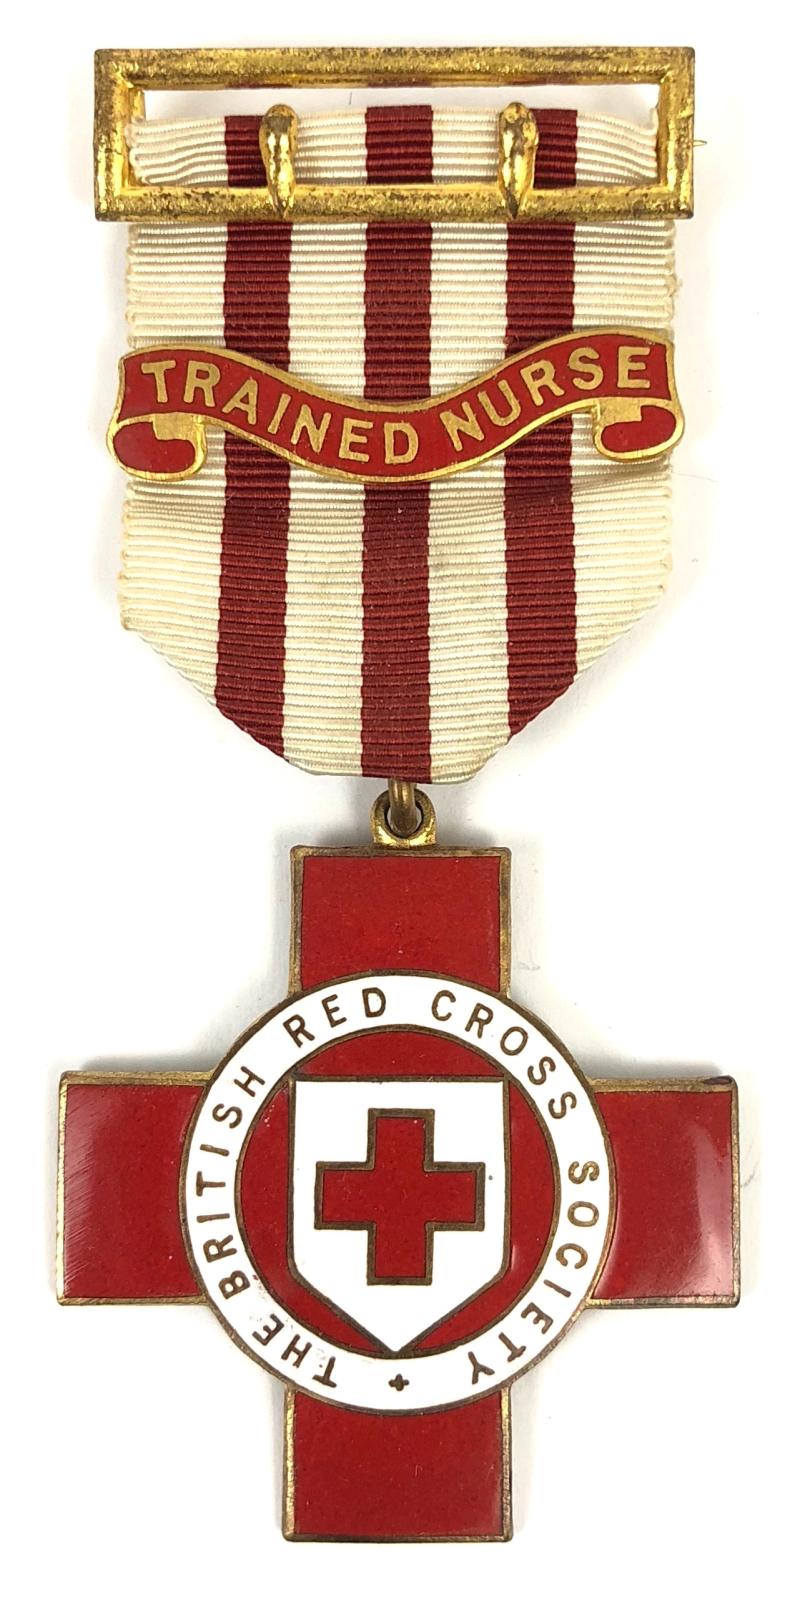 British Red Cross Society VAD Trained Nurse technical medal named